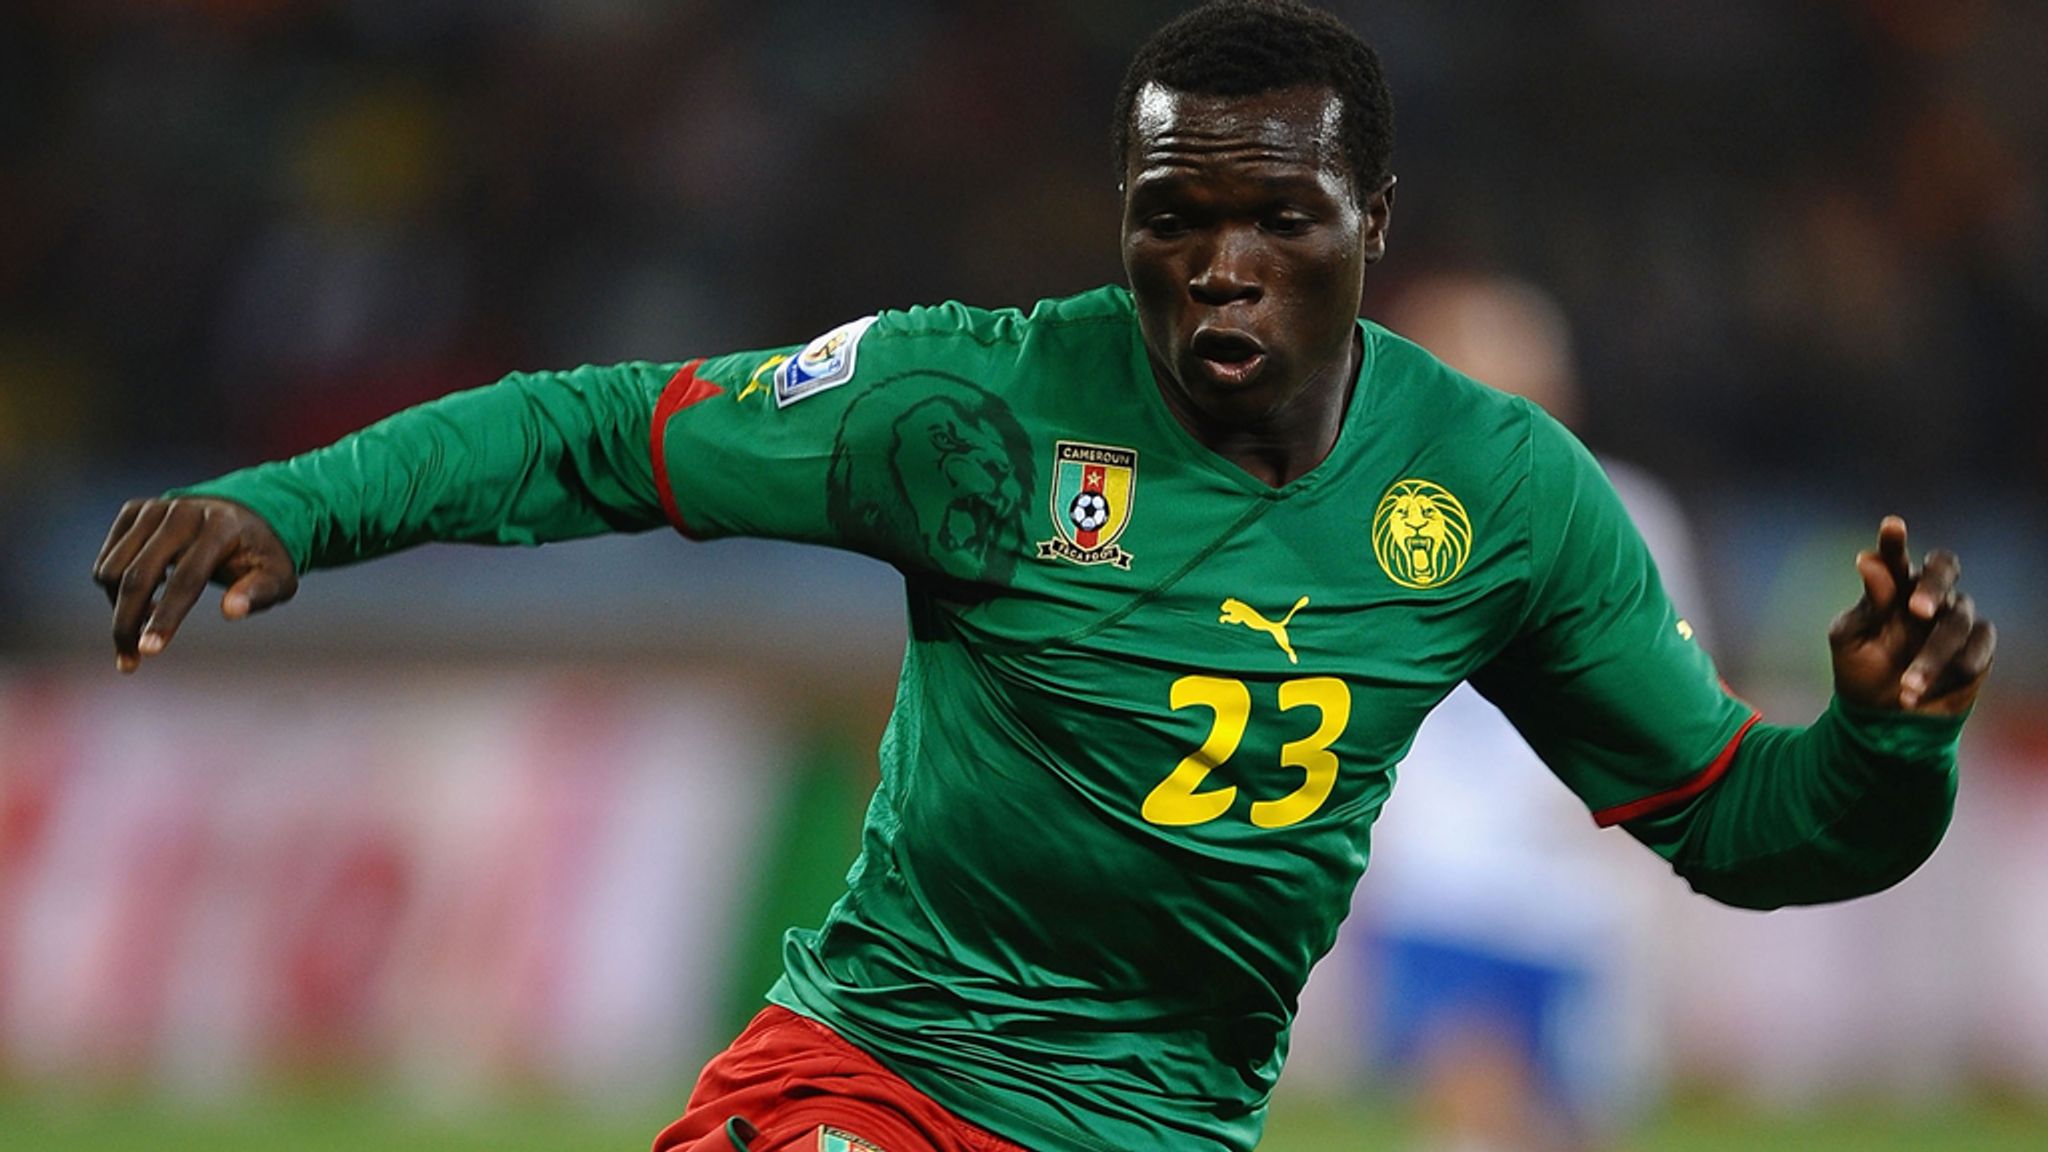 Transfer News: Porto beat Hull to the signing of Vincent Aboubakar